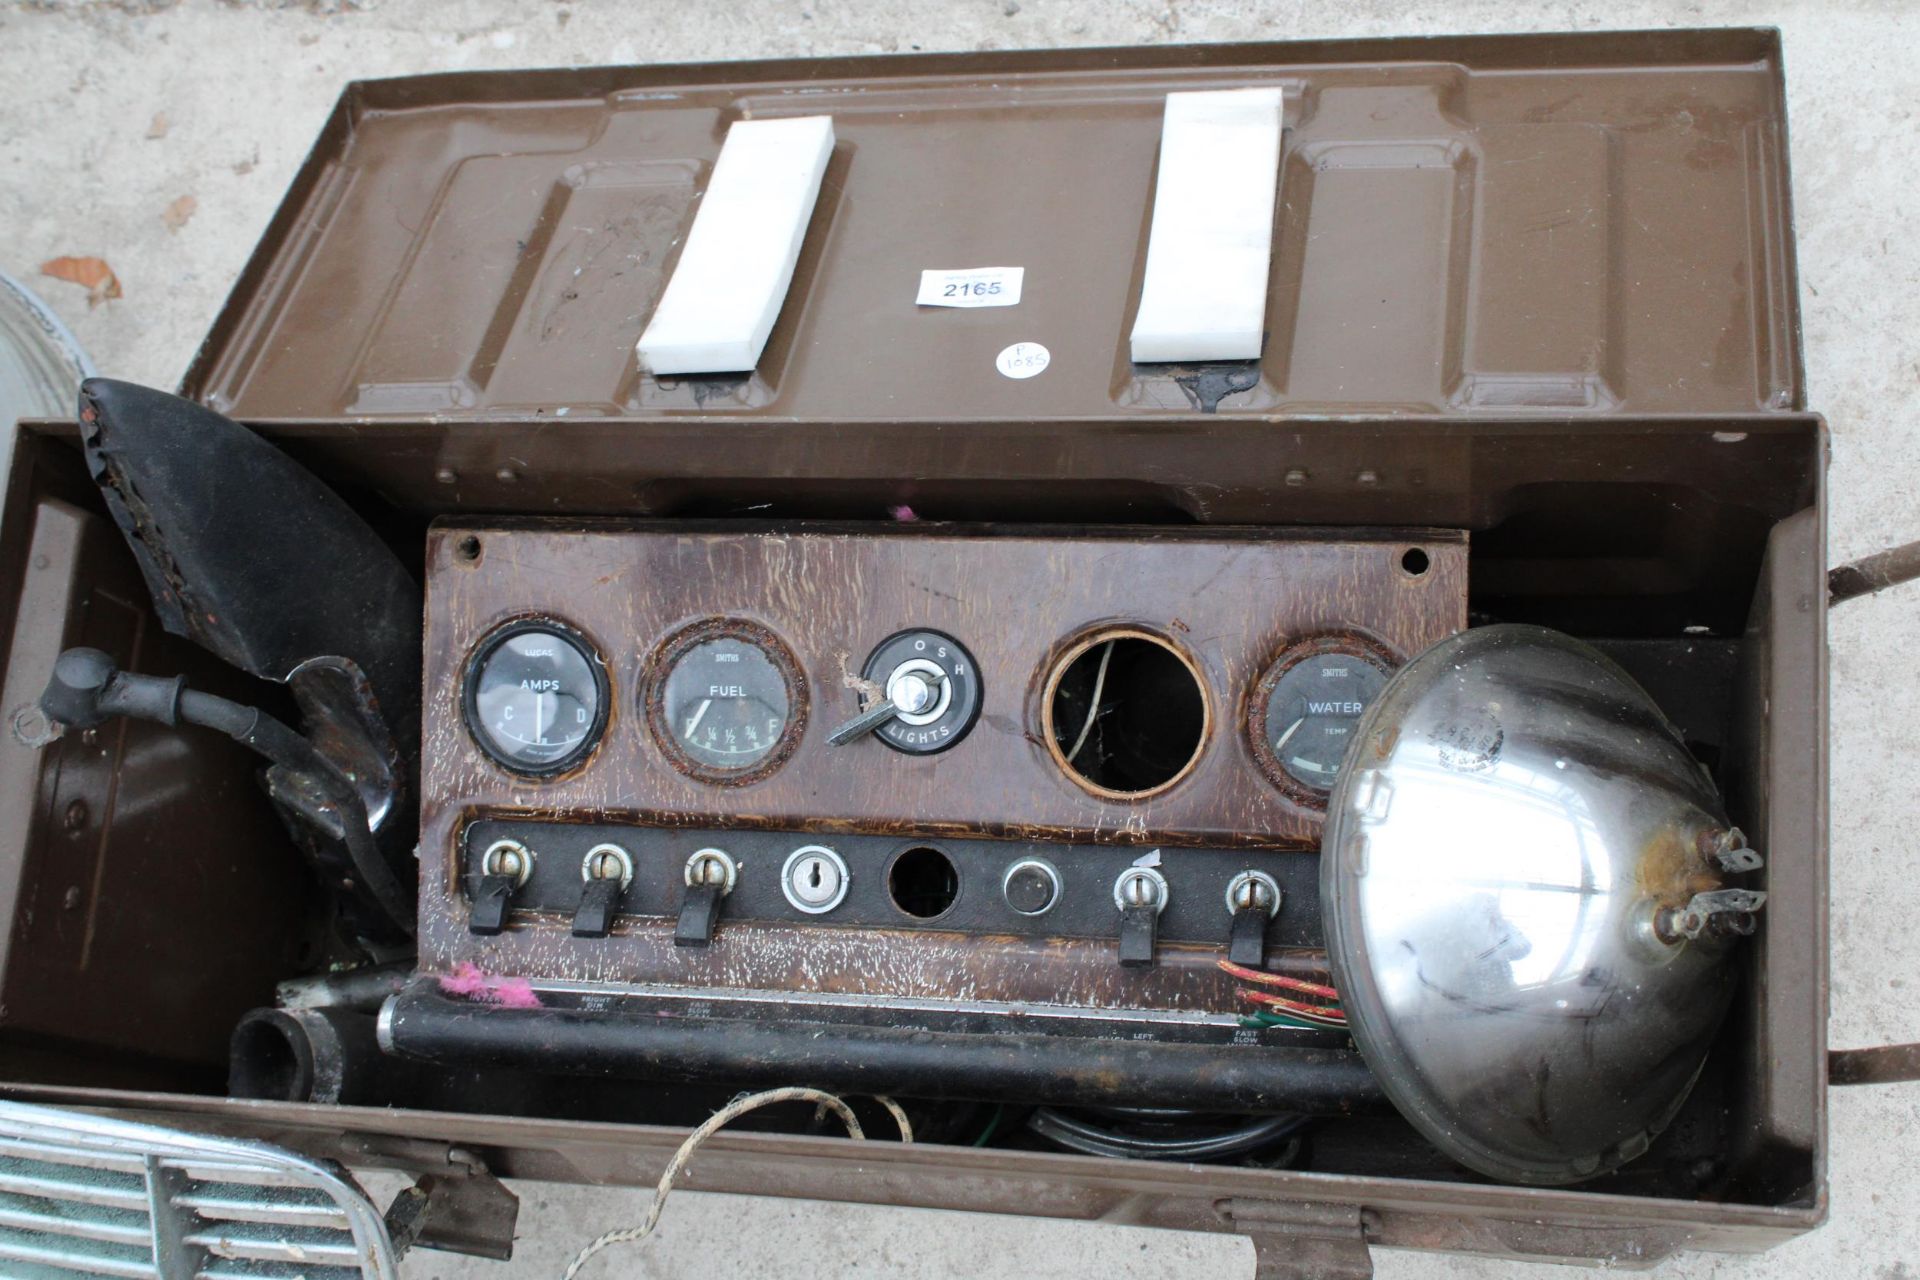 A PAIR OF ROVER ALLOY WHEELS, A VINTAGE JAGUAR RADIATOR GRILL, LUCAS LAMP AND CAR INSTRUMENTS - Image 3 of 5